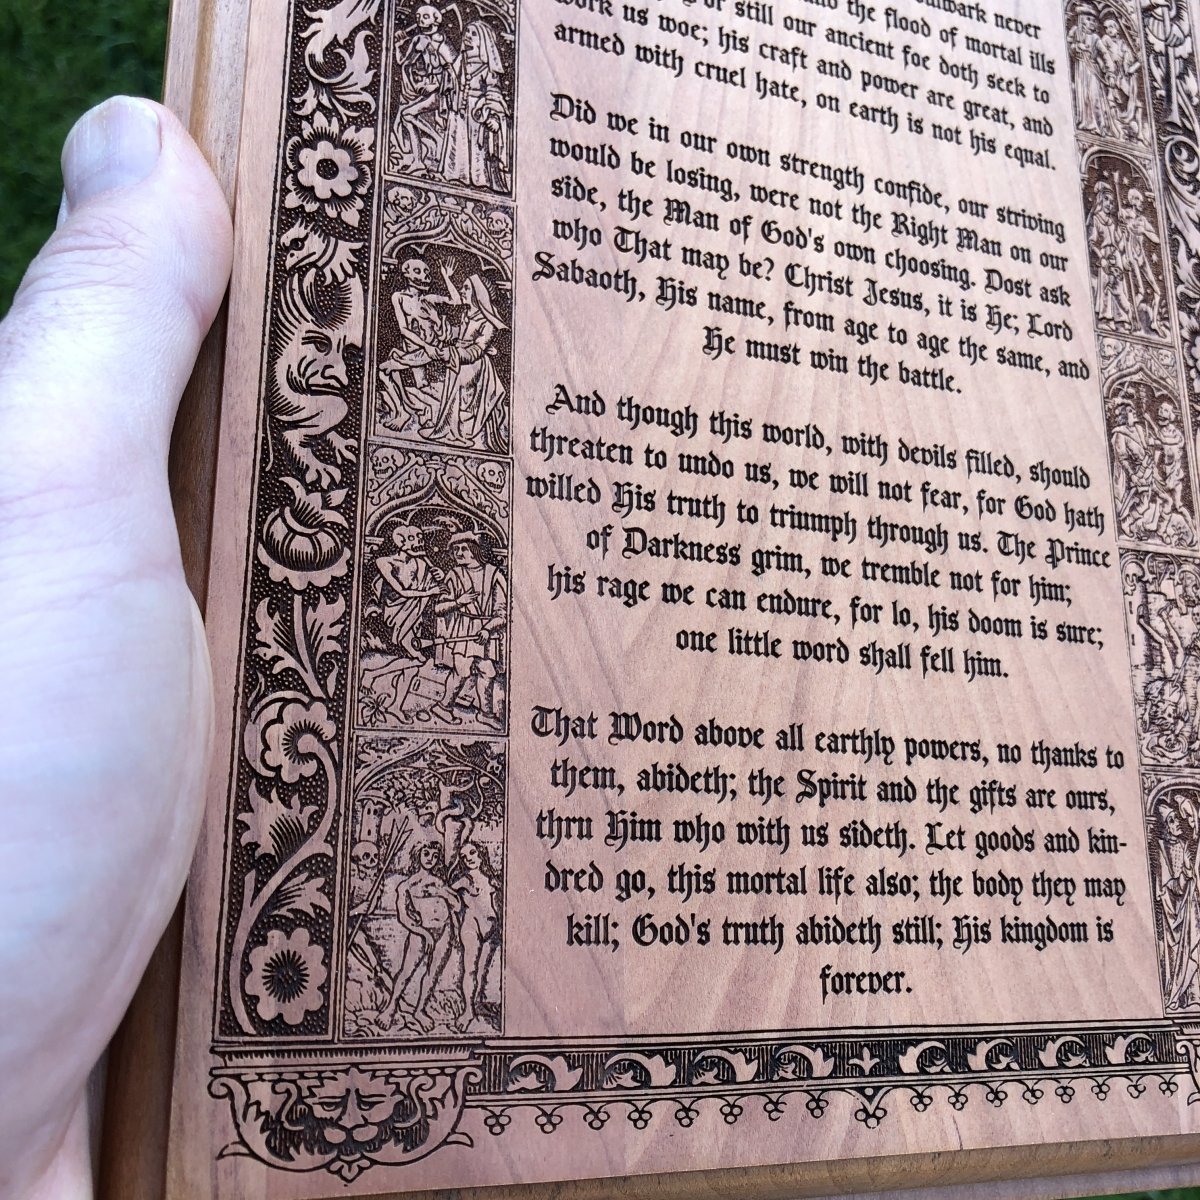 Engravedwood - Mighty Fortress - Engraved Wood Art - The Reformed Sage - #reformed# - #reformed_gifts# - #christian_gifts#